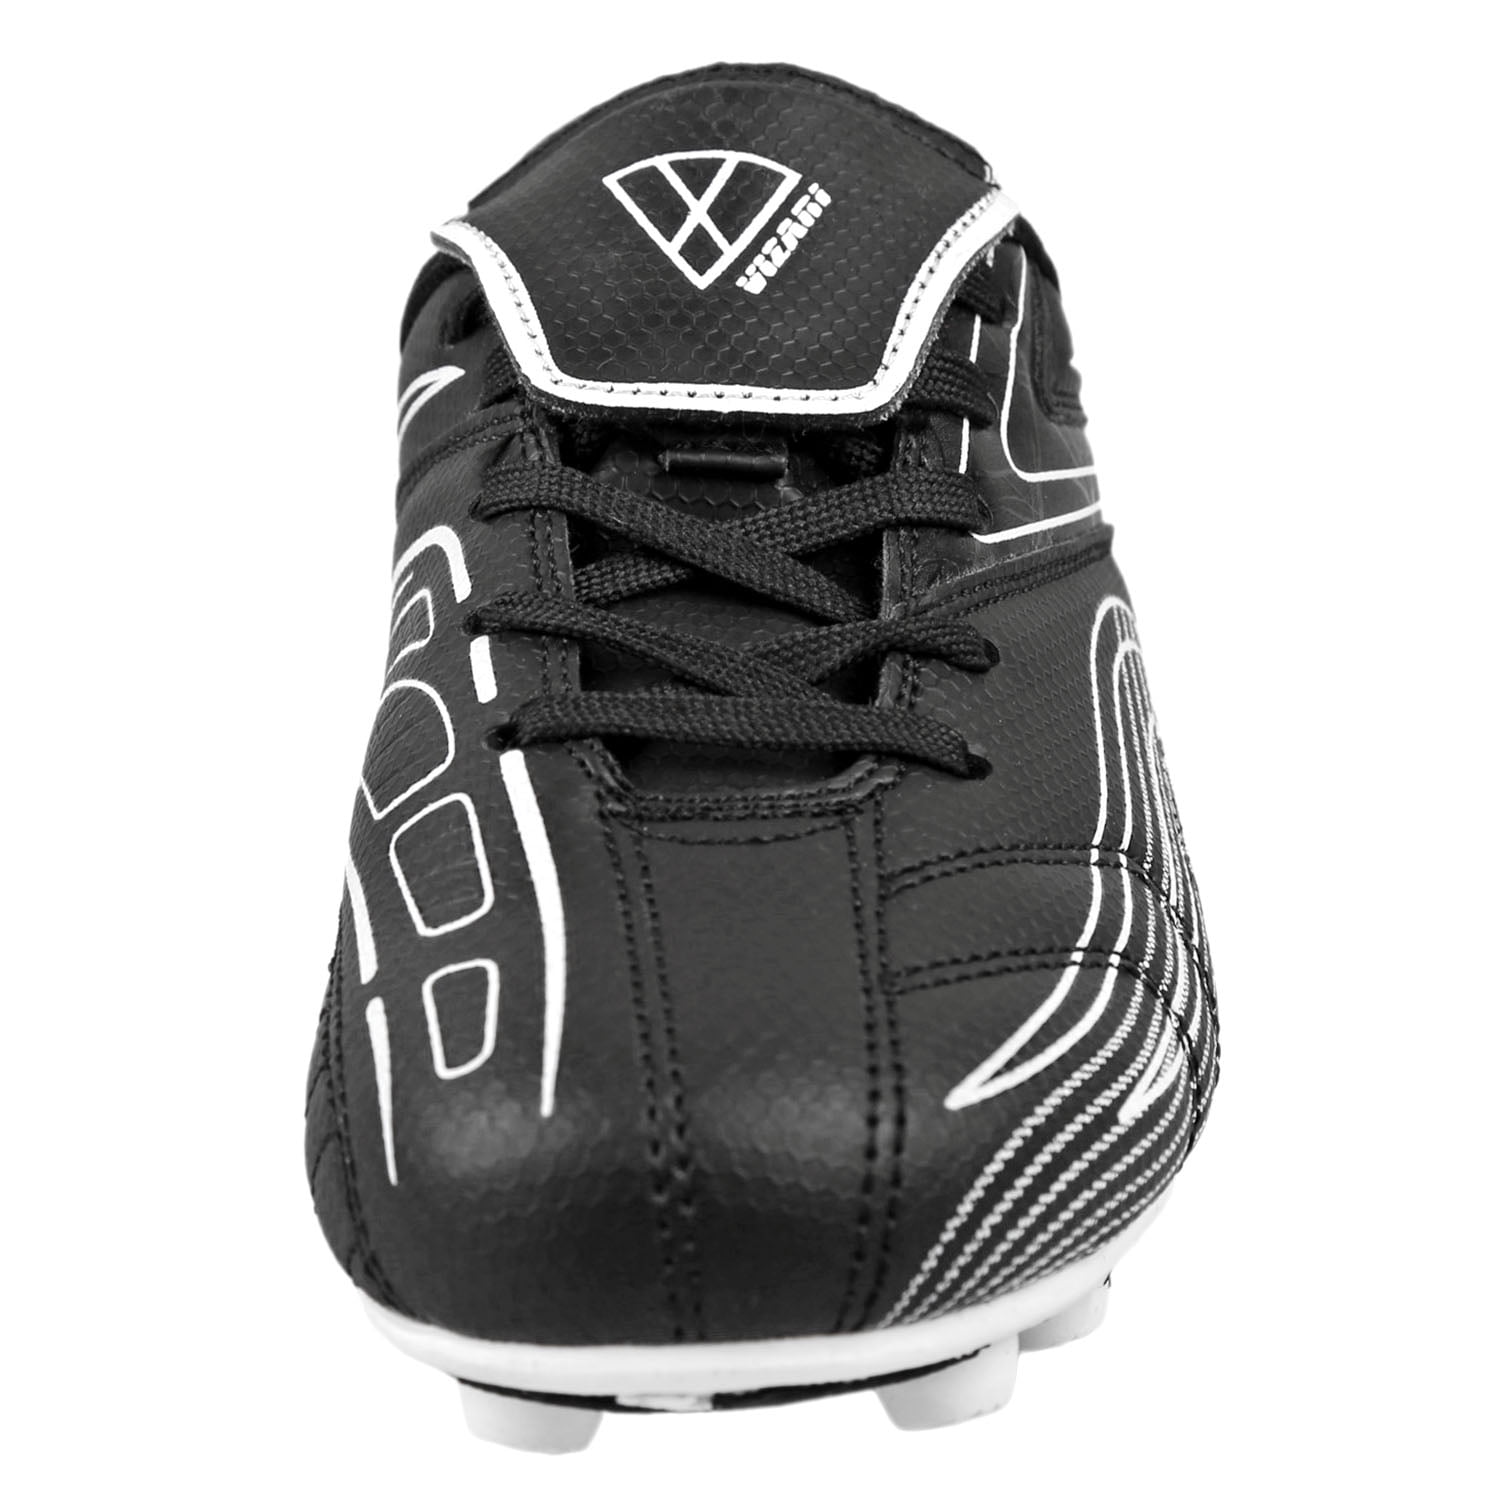 Outoor Soccer Shoes | Kids Soccer Cleats Vizari Youth/Jr Striker FG Soccer Cleats Soccer Cleats Boys 